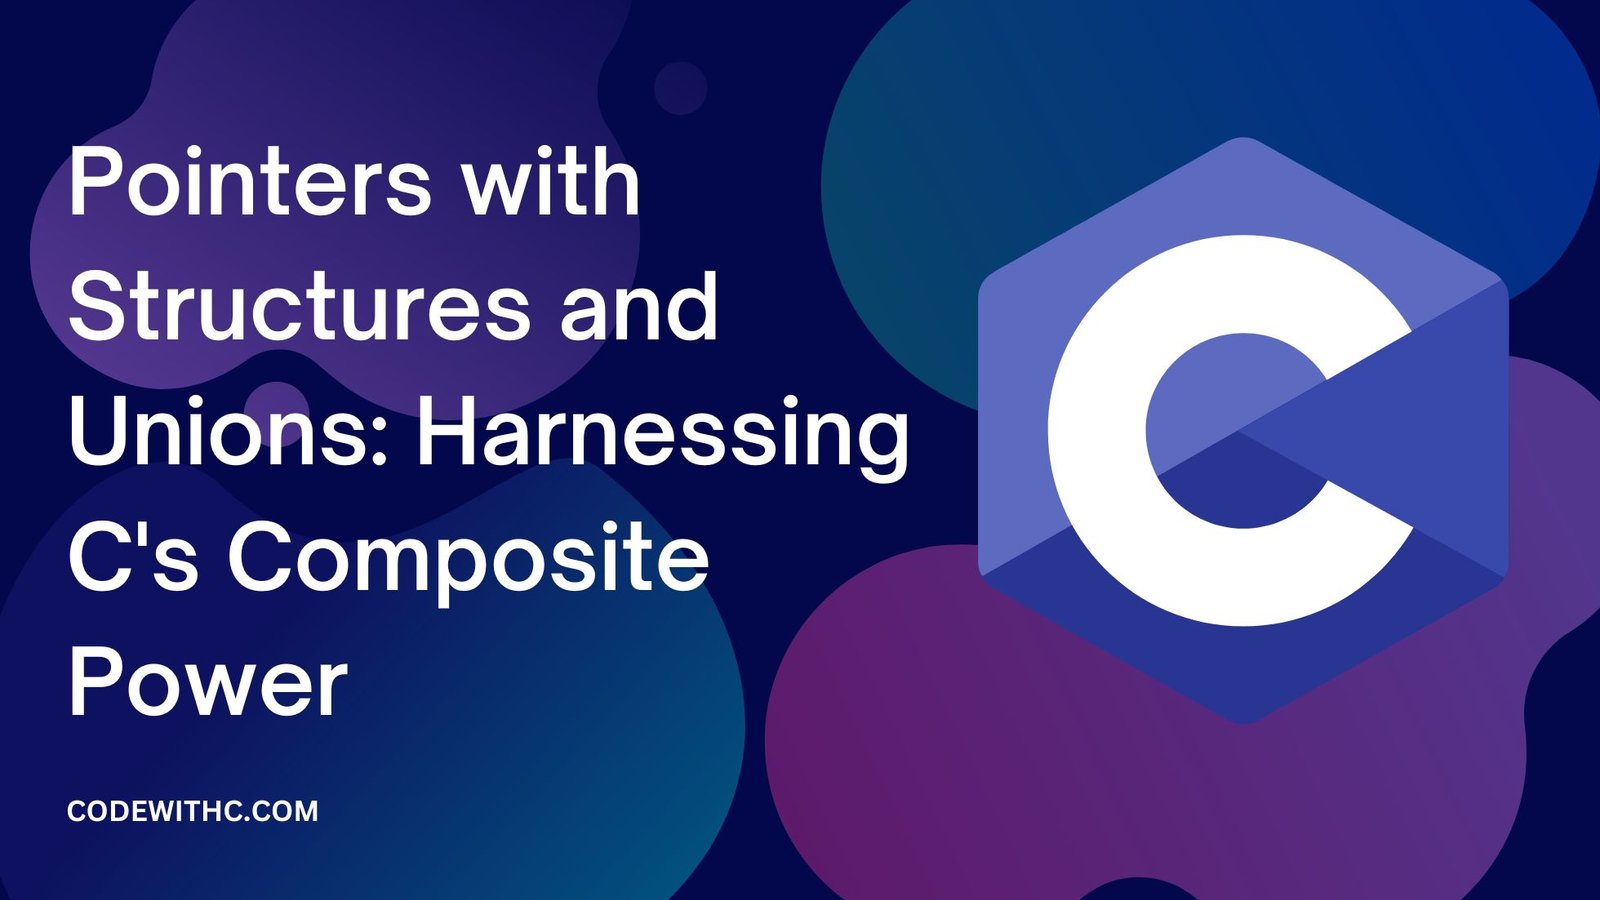 Pointers with Structures and Unions: Harnessing C's Composite Power